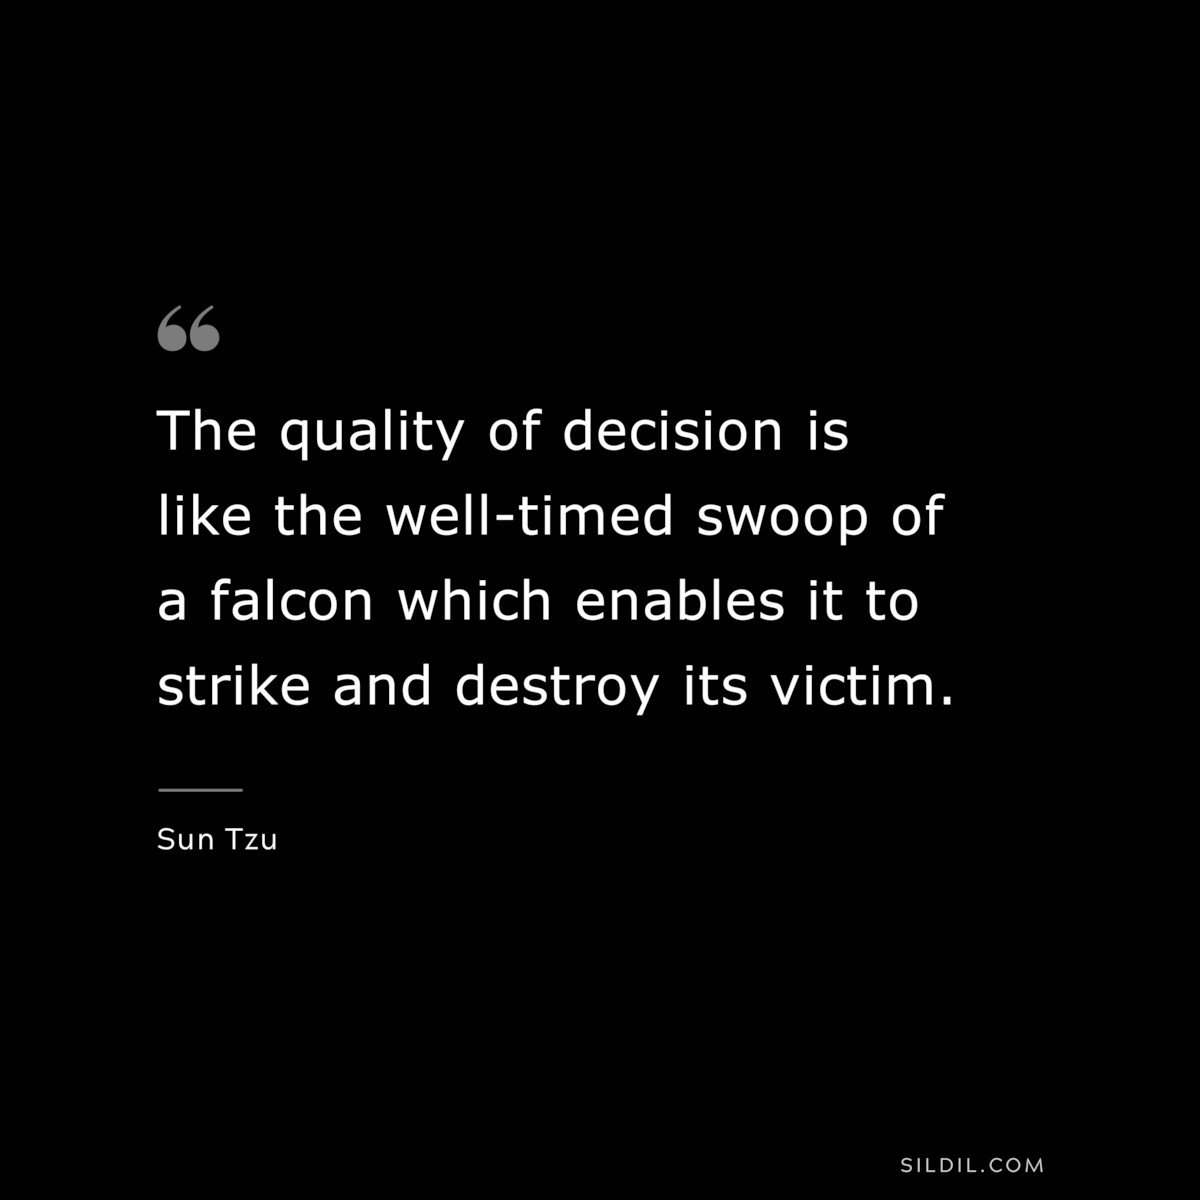 The quality of decision is like the well-timed swoop of a falcon which enables it to strike and destroy its victim.― Sun Tzu